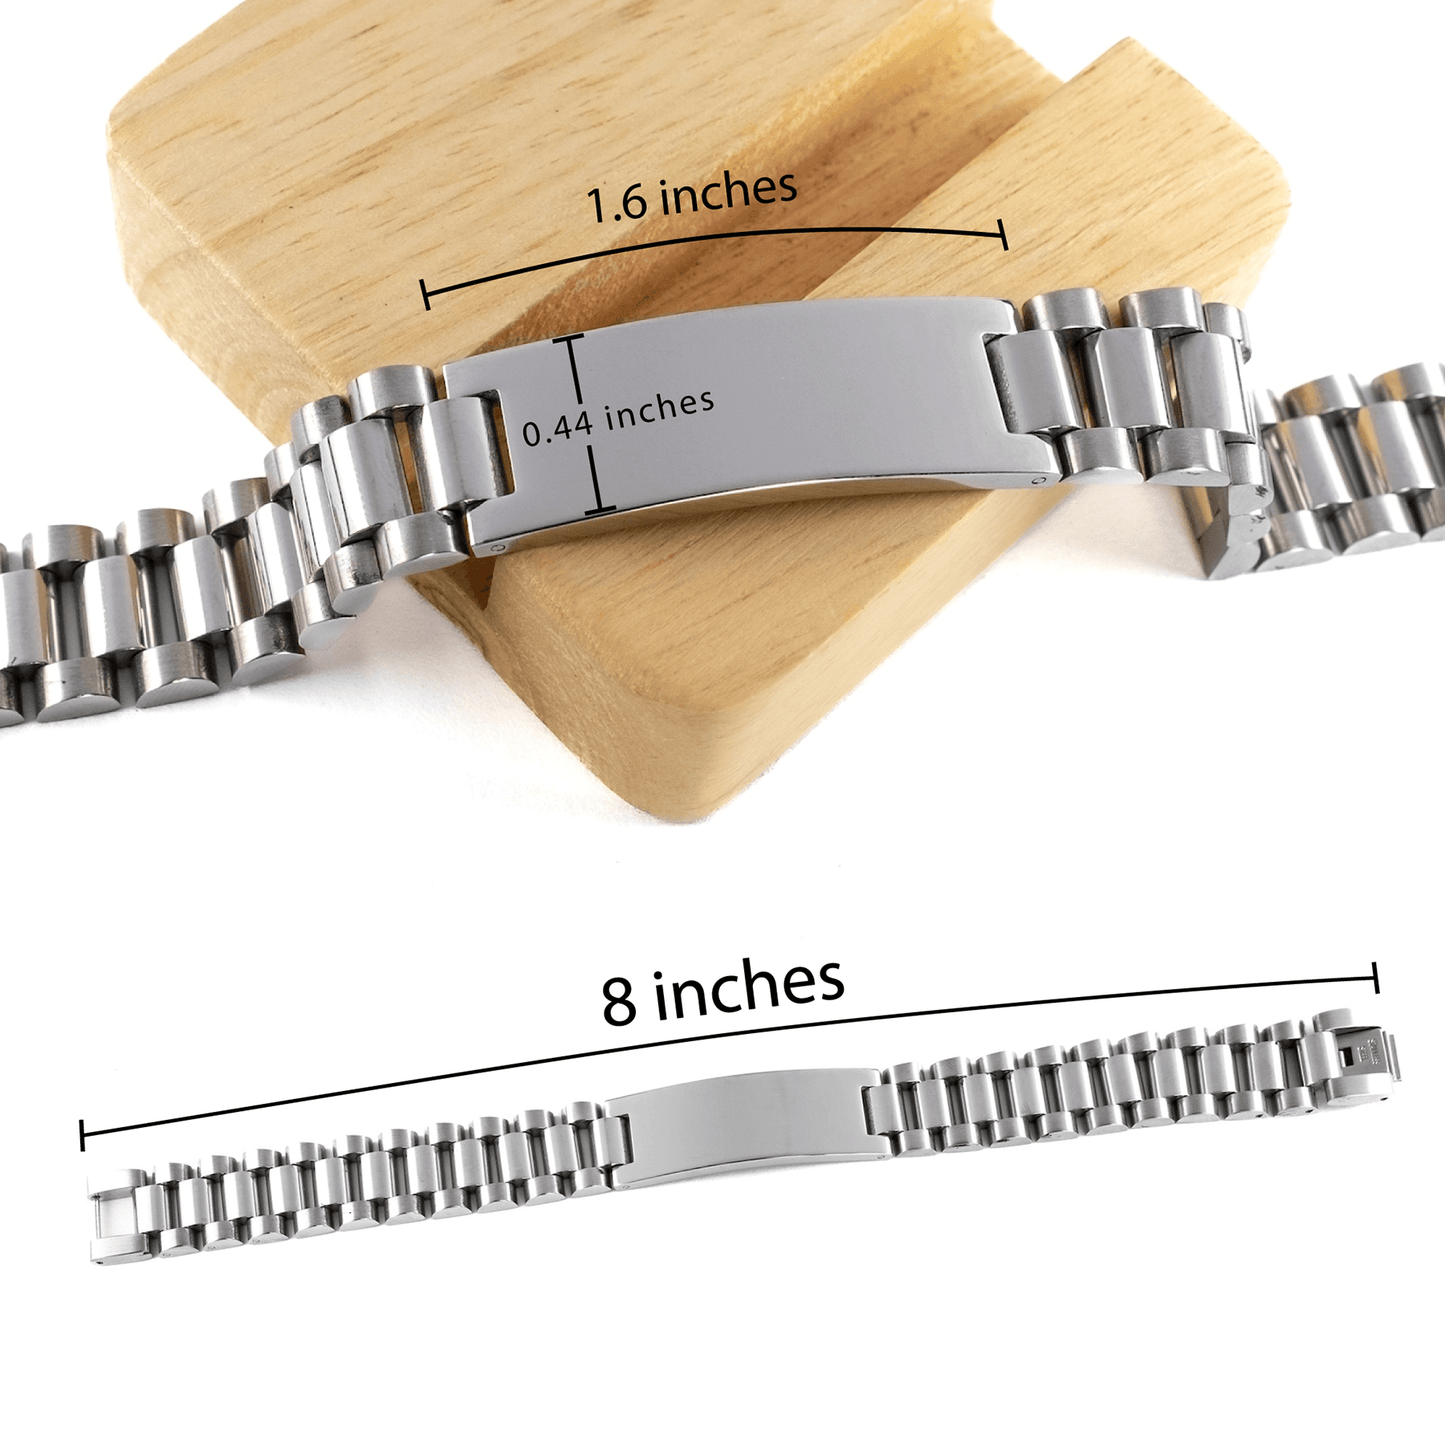 Jeweler Ladder Stainless Steel Engraved Bracelet - Thanks for being who you are - Birthday Christmas Jewelry Gifts Coworkers Colleague Boss - Mallard Moon Gift Shop